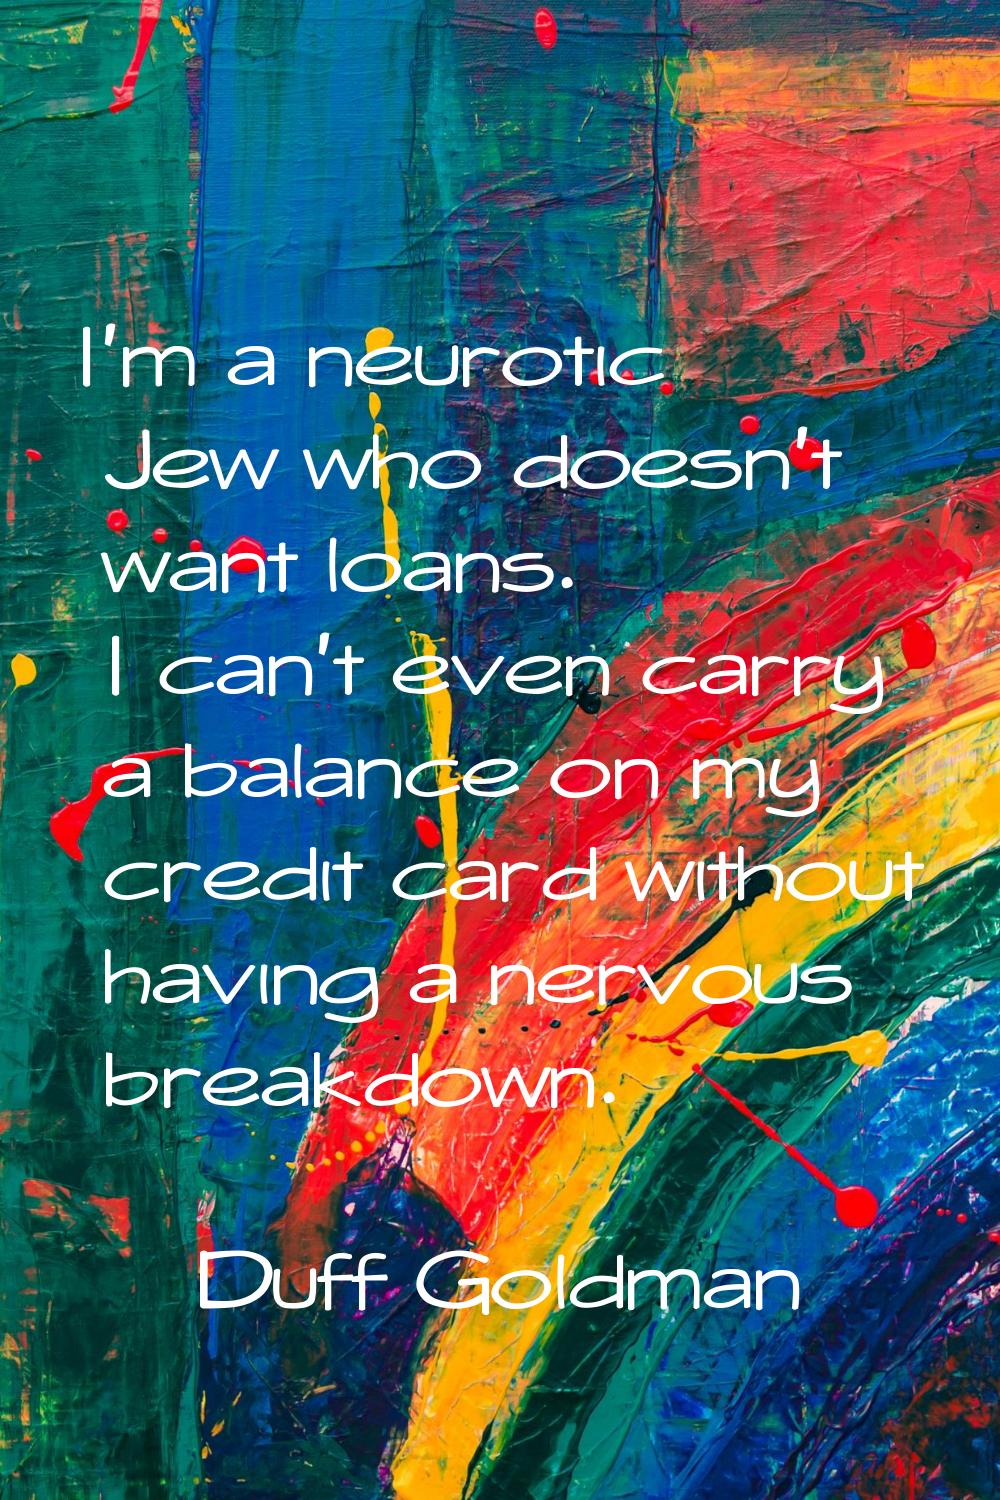 I'm a neurotic Jew who doesn't want loans. I can't even carry a balance on my credit card without h